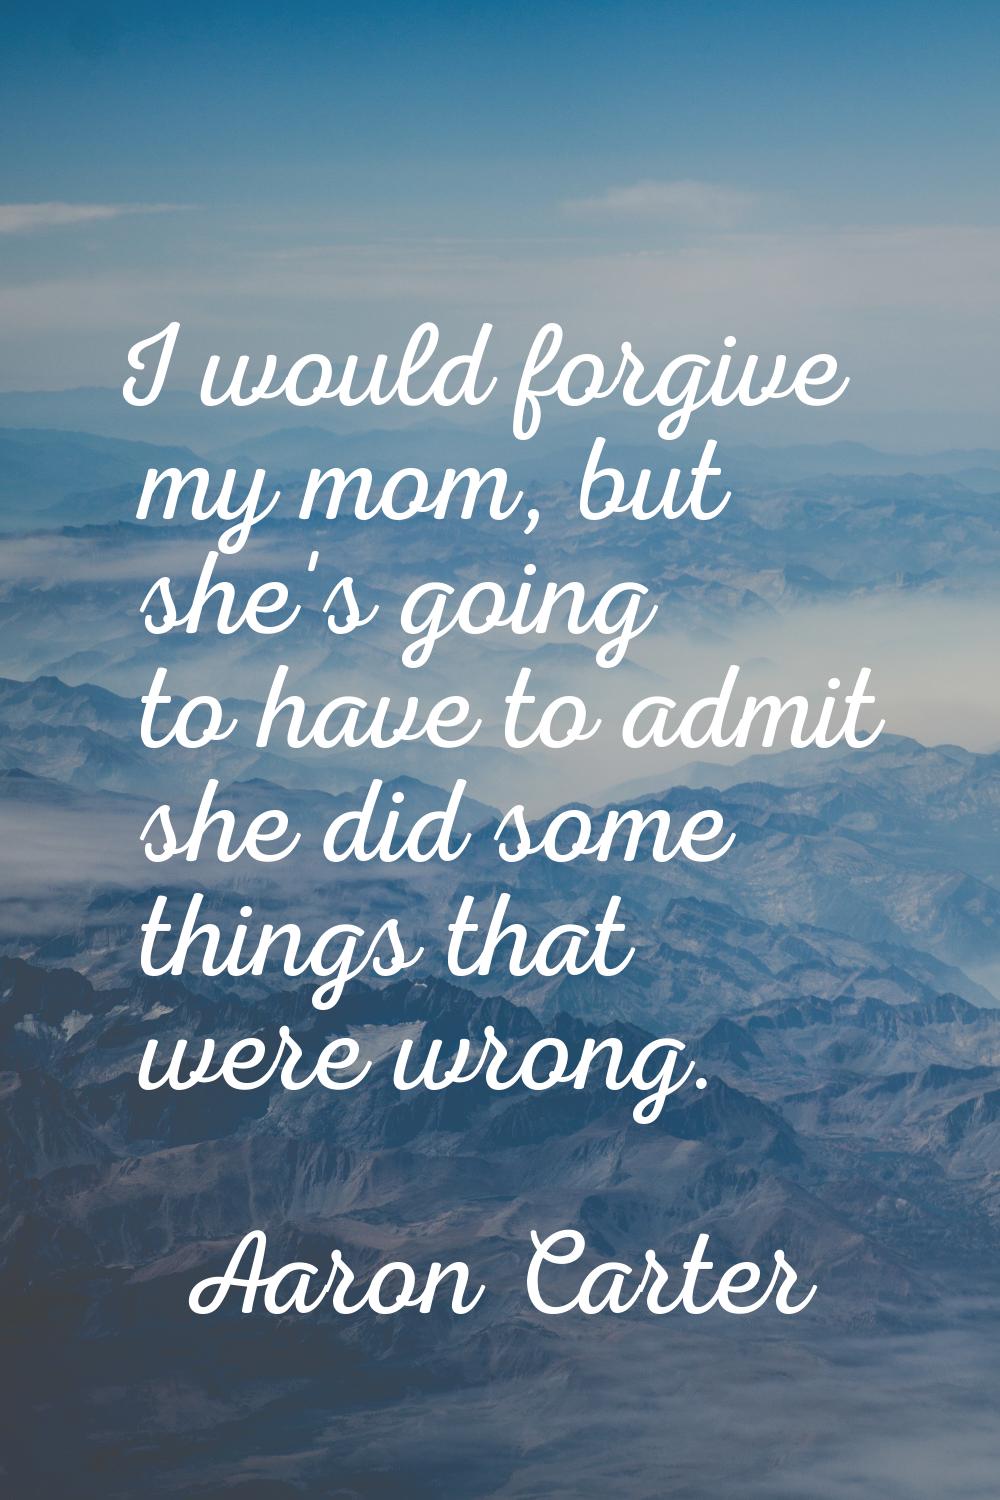 I would forgive my mom, but she's going to have to admit she did some things that were wrong.